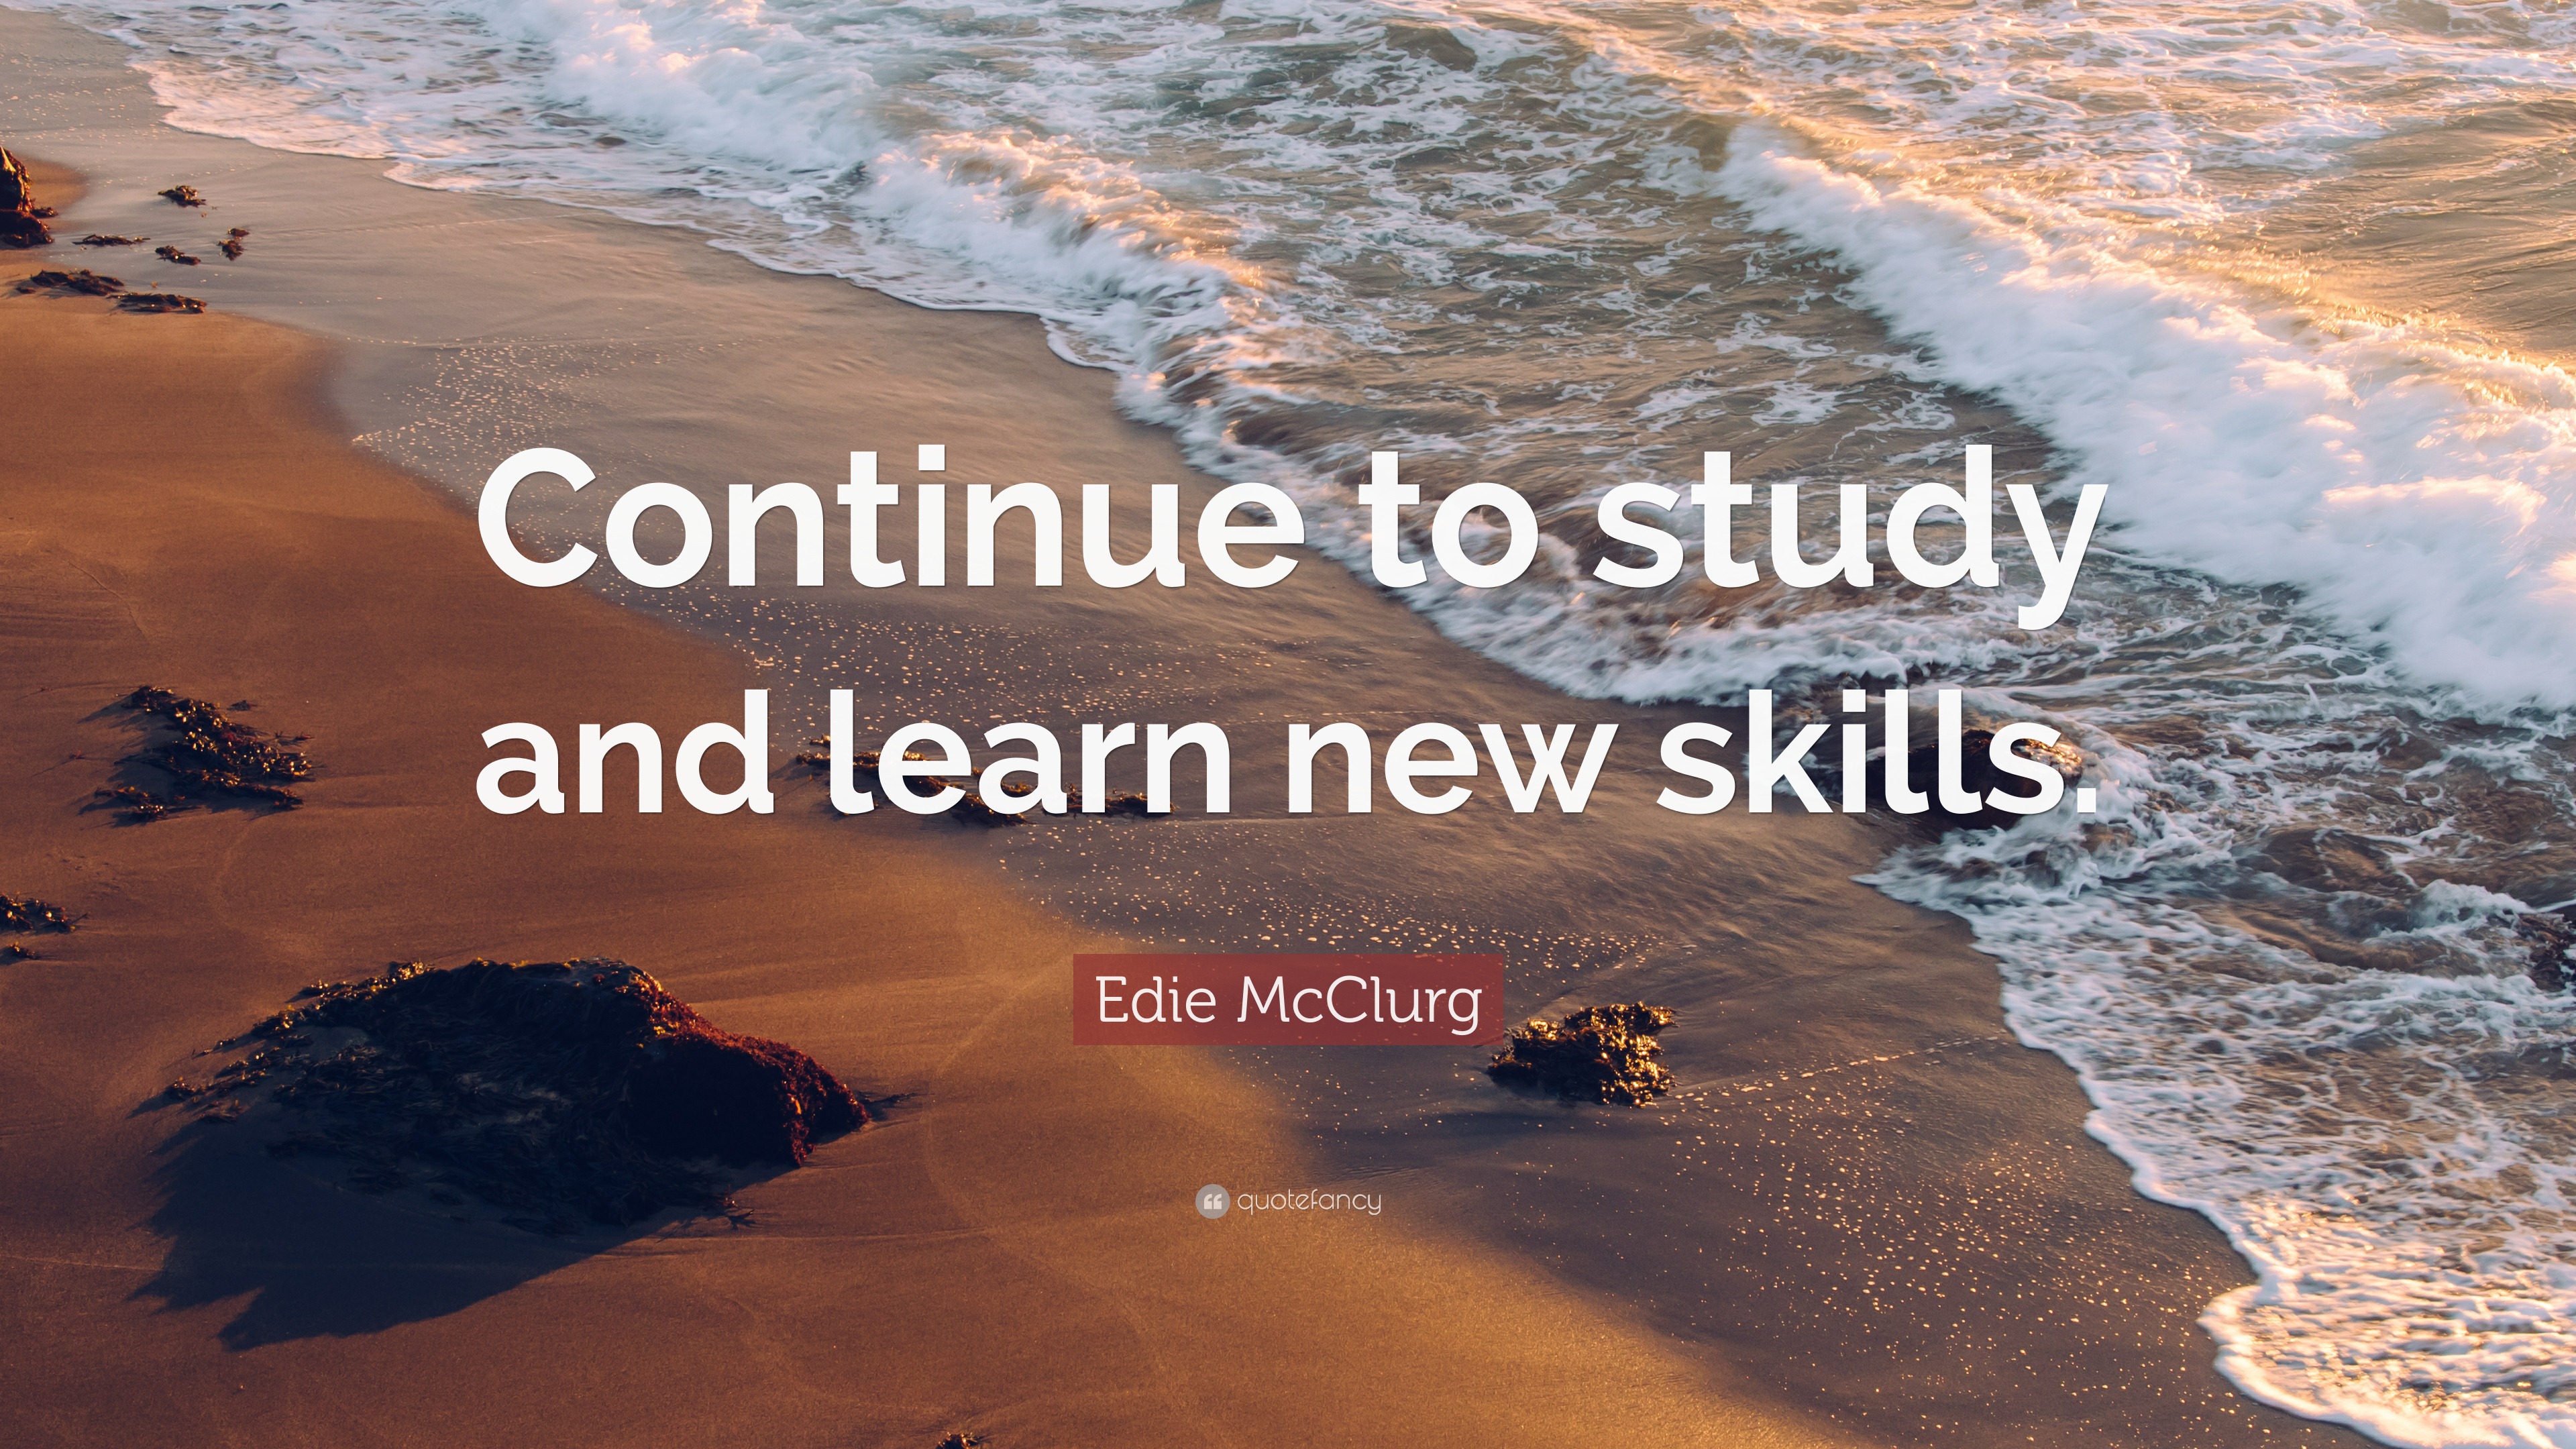 Quotes, Books, Courses, Videos & Tips on Learning Skills. The art of  learning new skills…